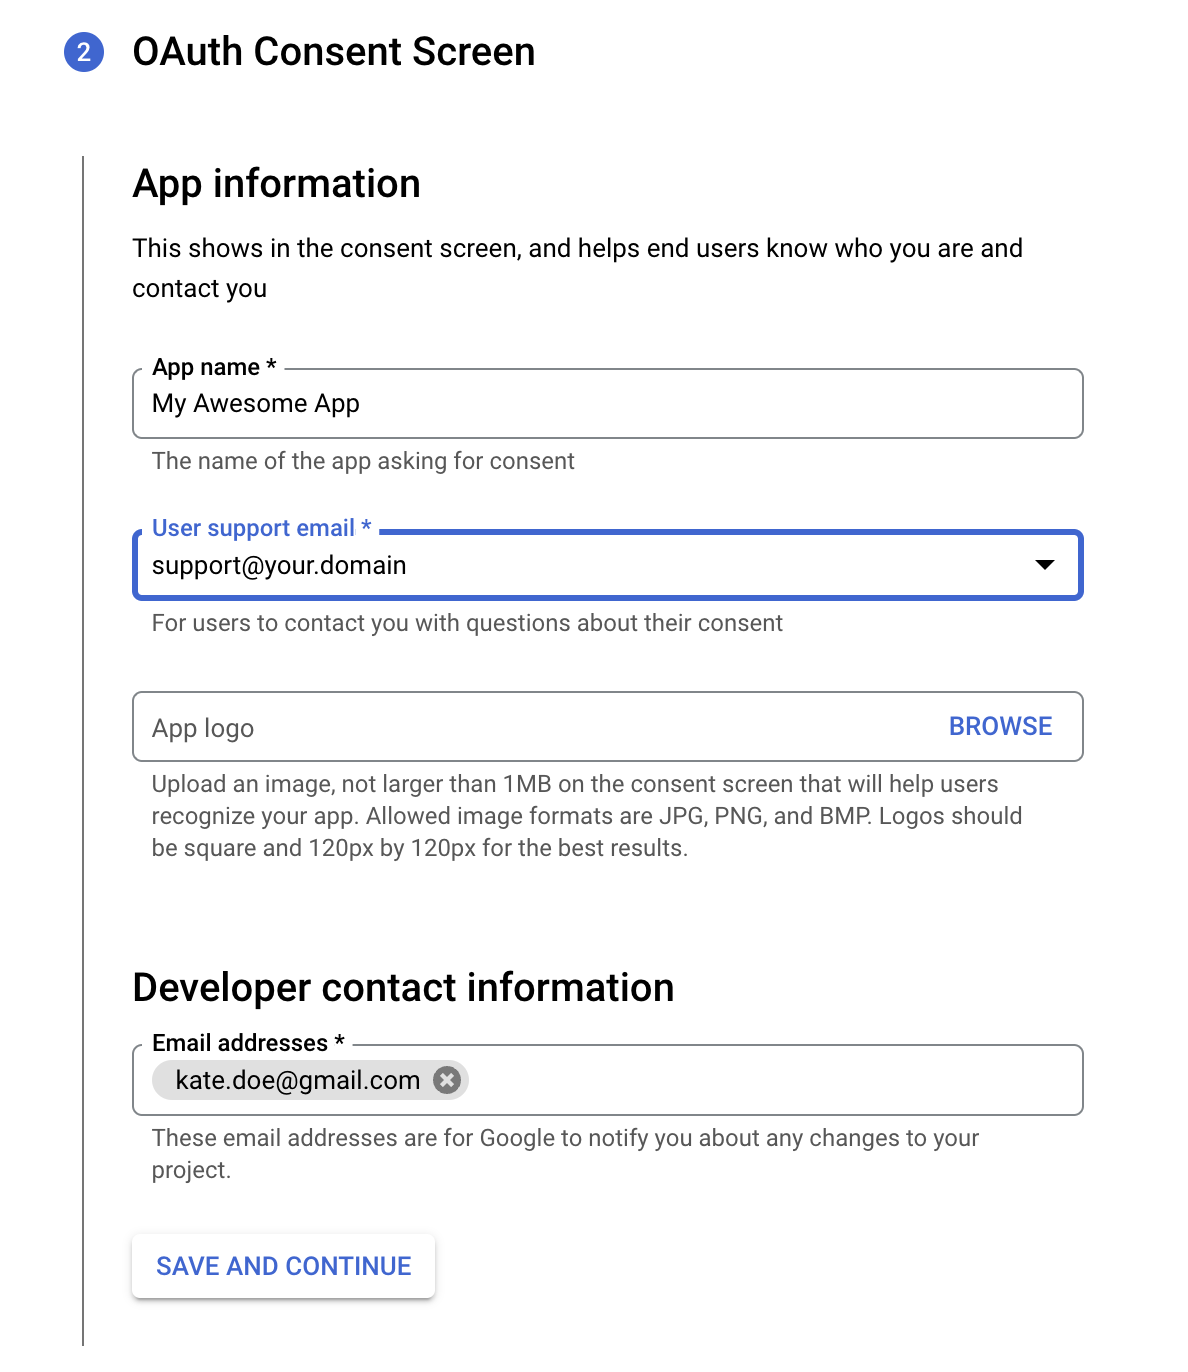 Configuring the App name and user support email in the OAuth consent screen